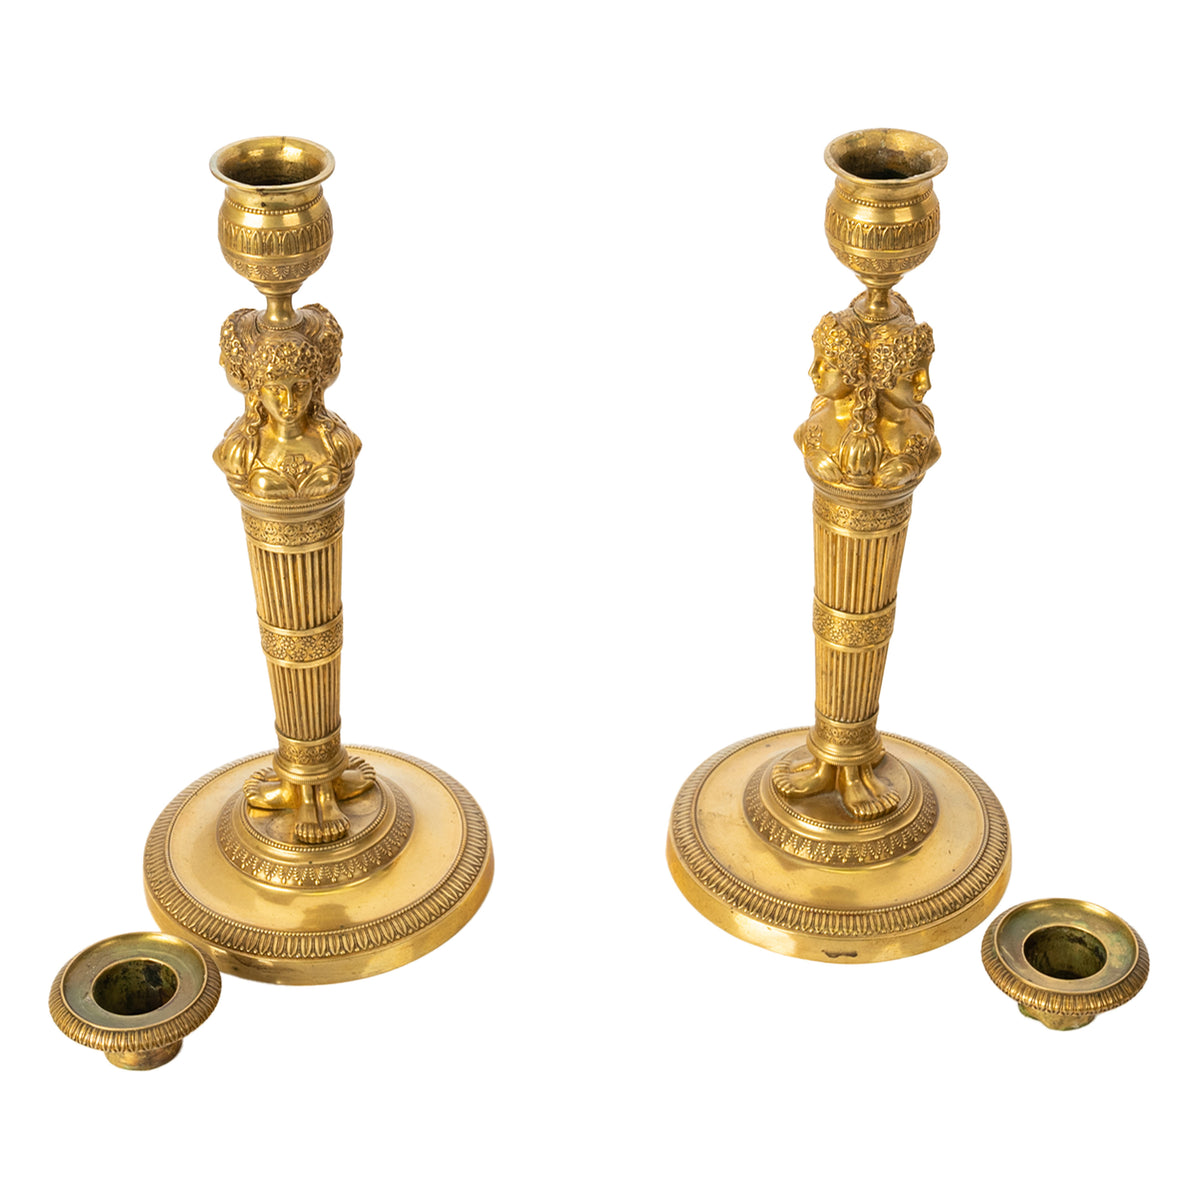 Pair Antique Early 19thC French Empire Neoclassical Gilt Bronze Candlesticks